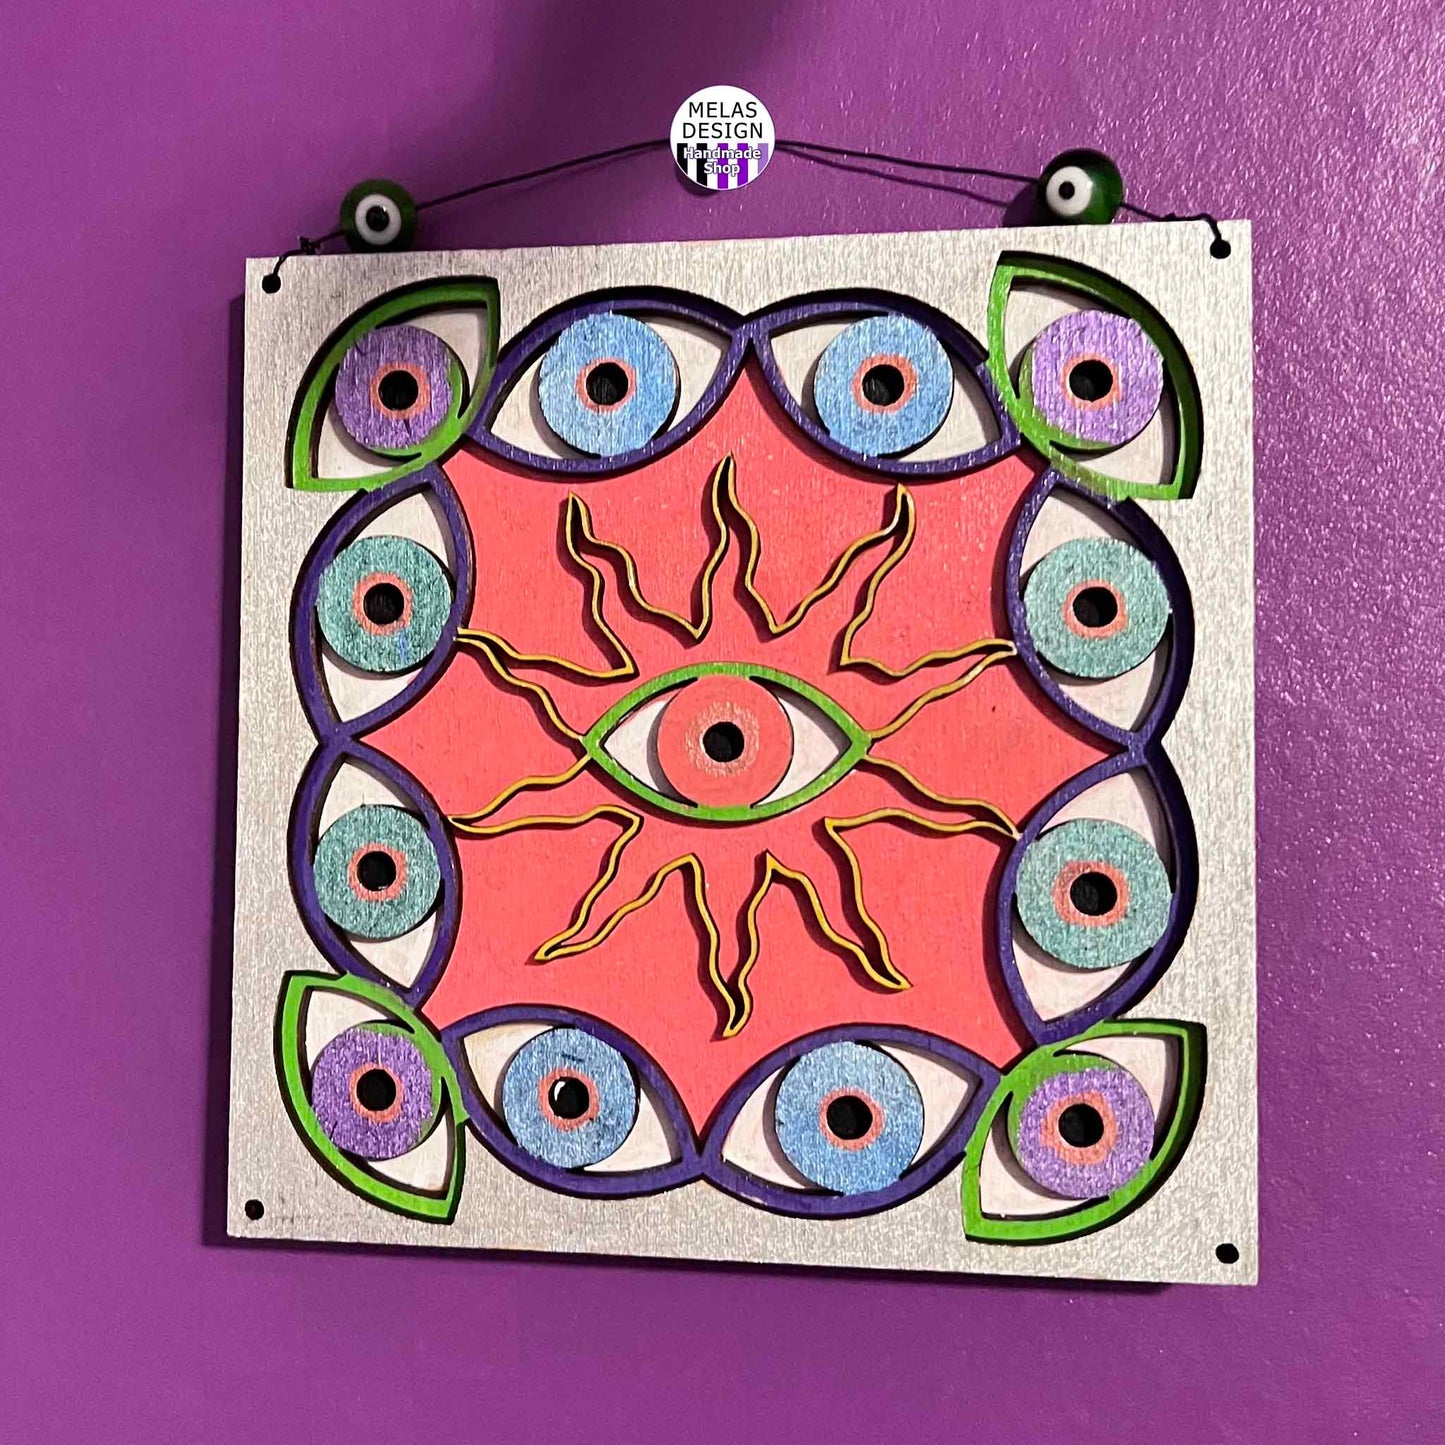 Trippy Witchy Sun and Eyes Mandala Art in Wood